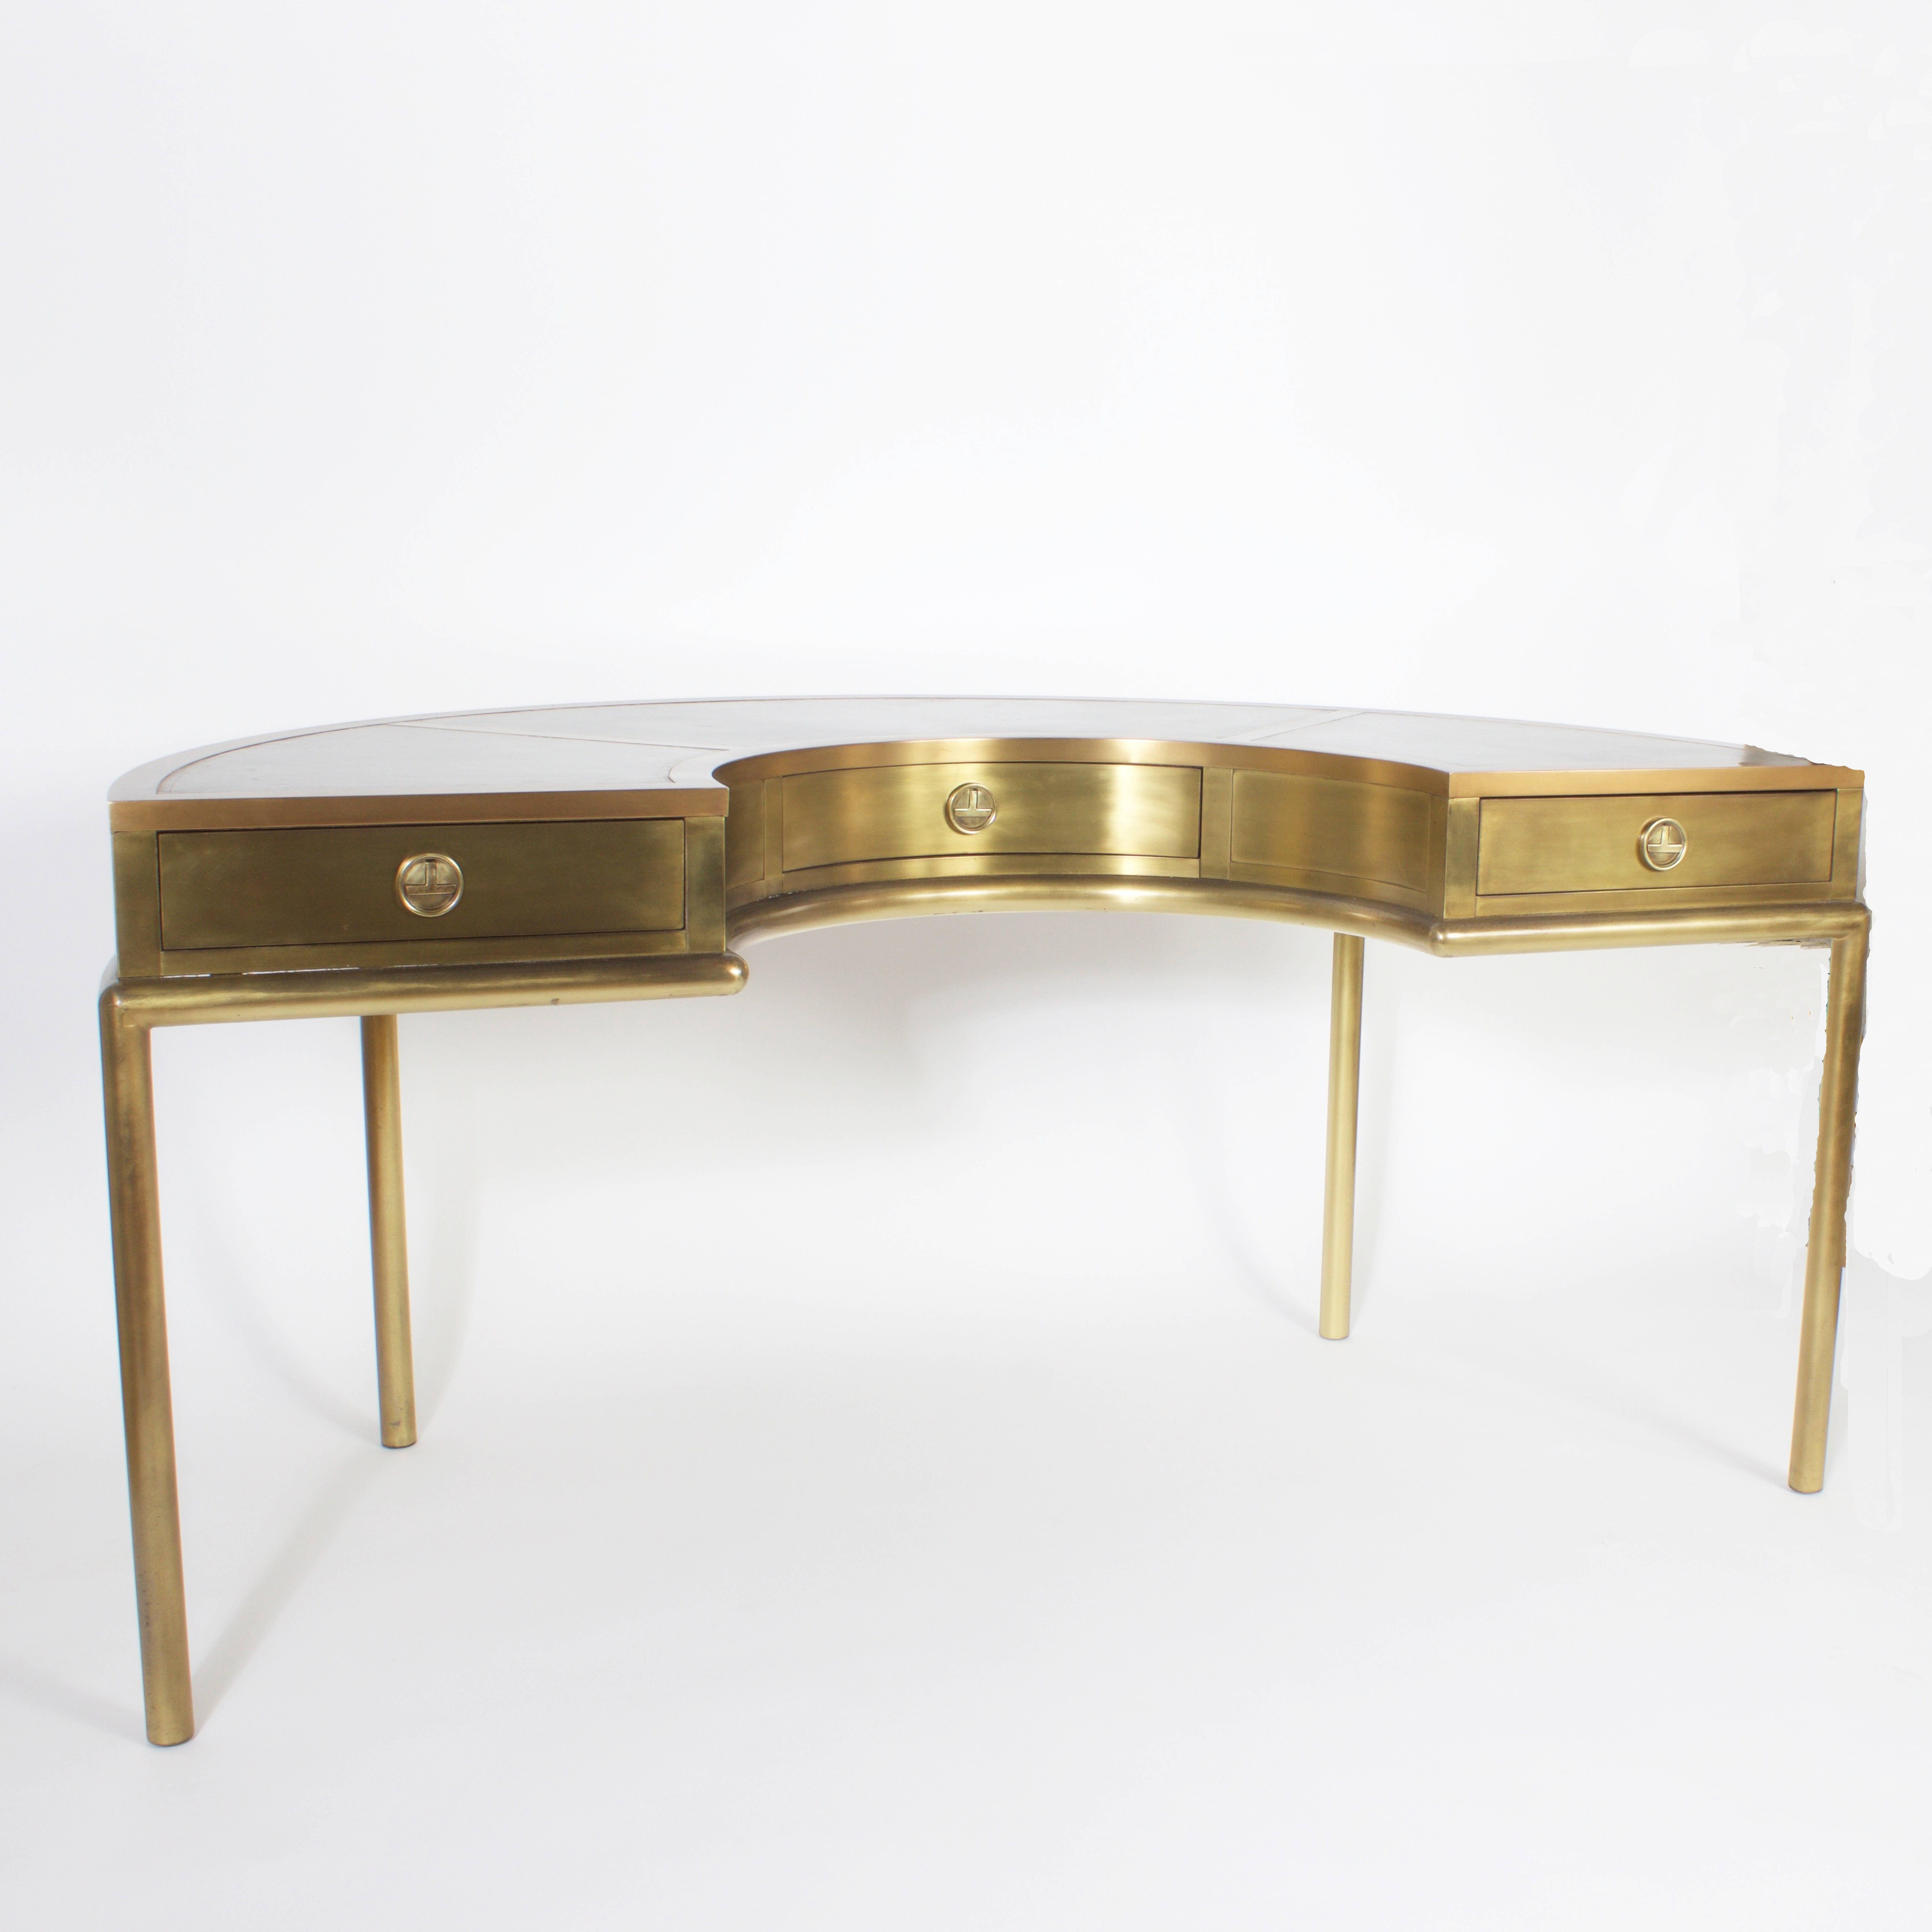 Sleek Mid-Century demilune brass and leather desk by Mastercraft. The top has three panels of variegated dark green leather trimmed in gold. The front has a semi circular cut-out and three drawers. The legs are simple, modern and round. This desk